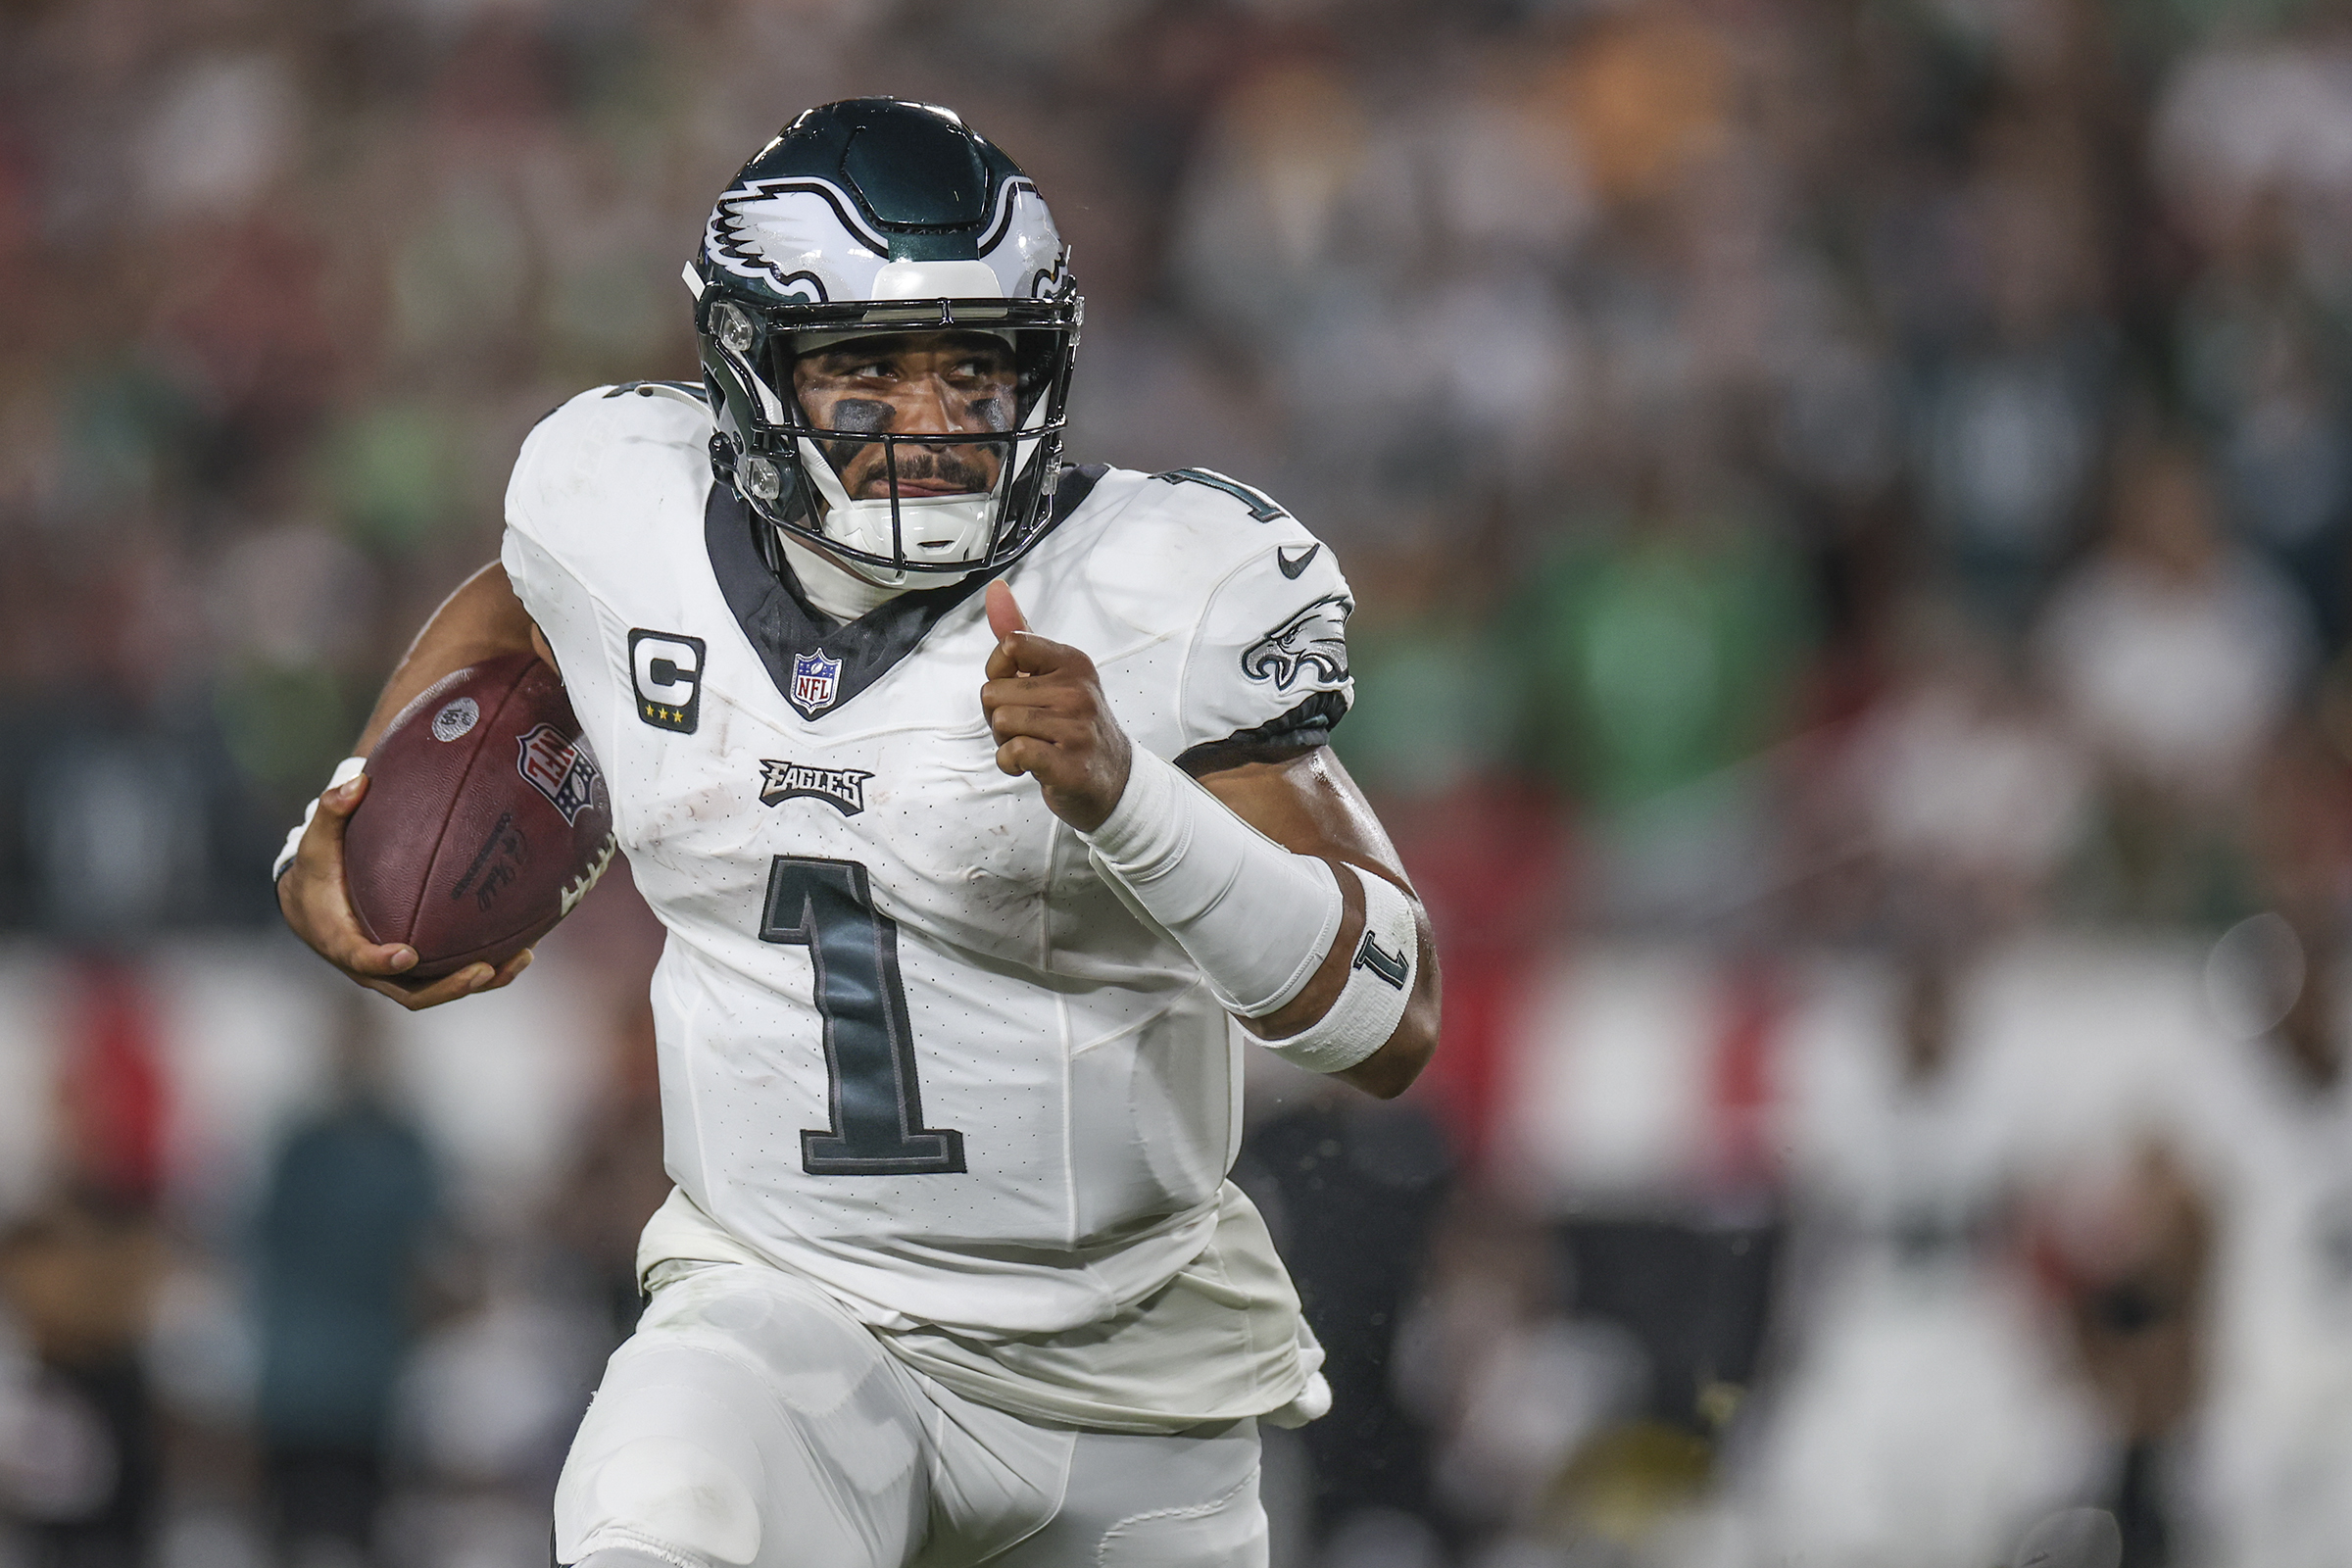 Eagles-Commanders: Start time, channel, how to watch and stream